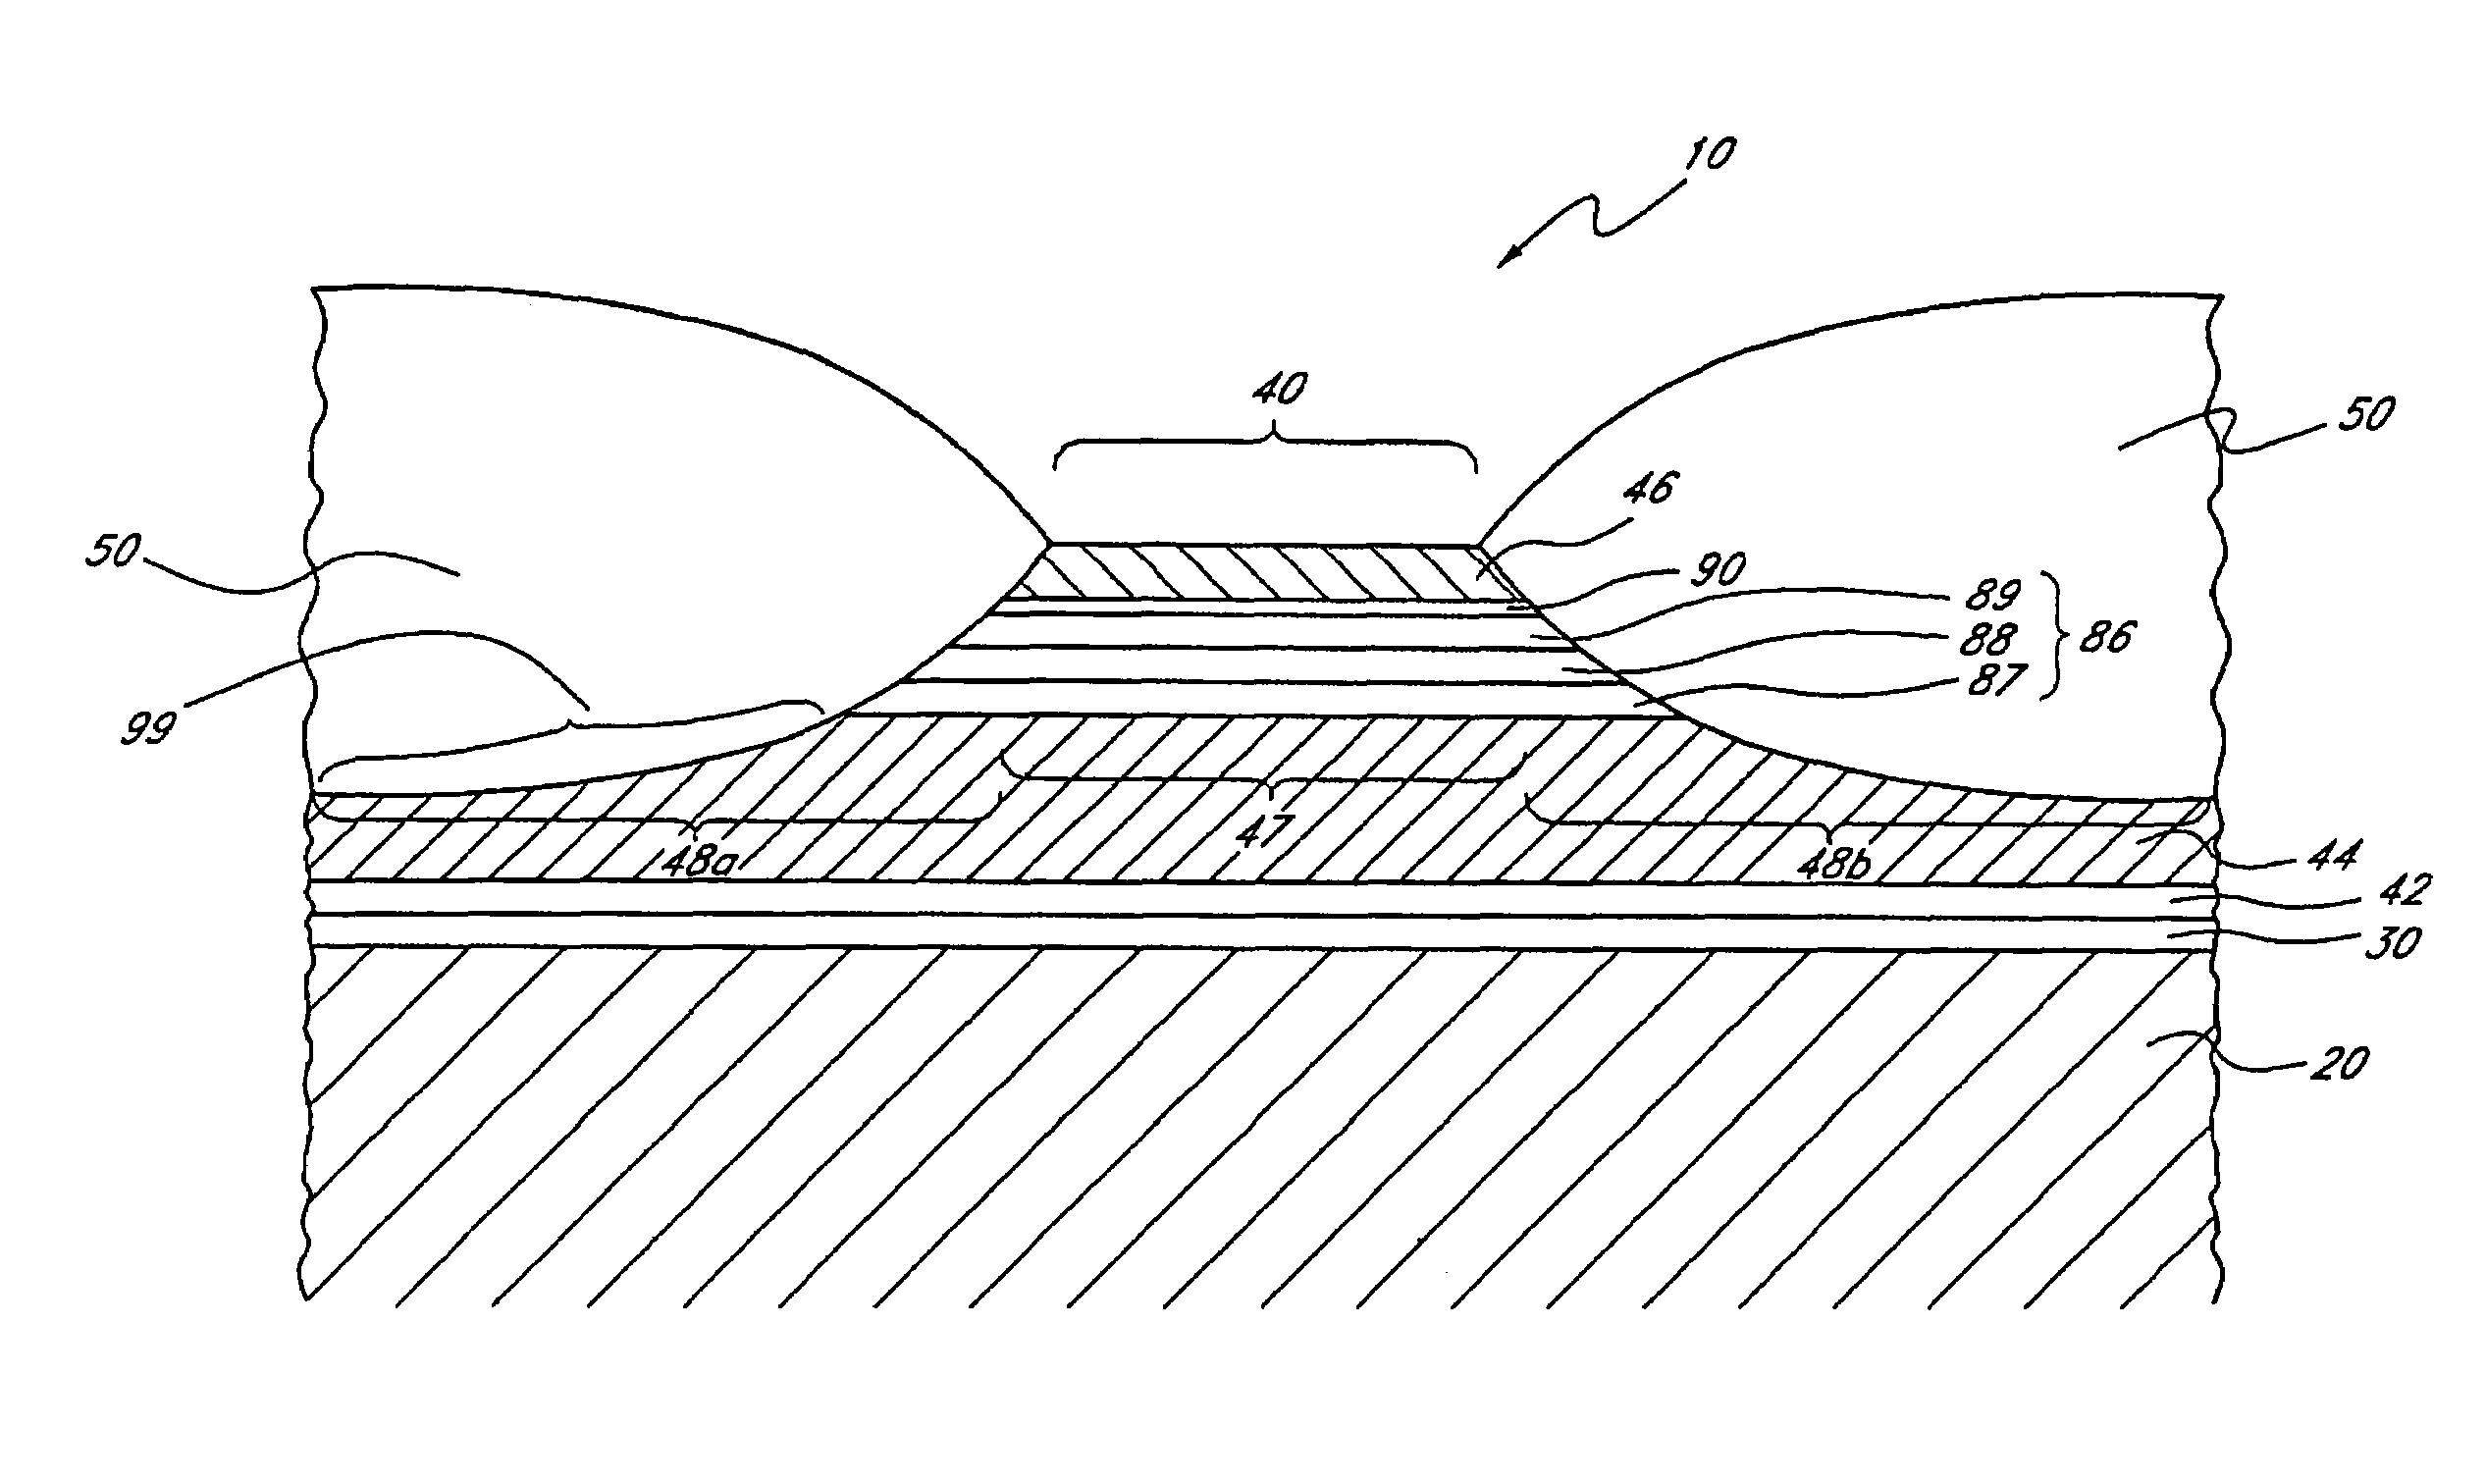 Magnetoresistive read sensor with reduced effective shield-to-shield spacing